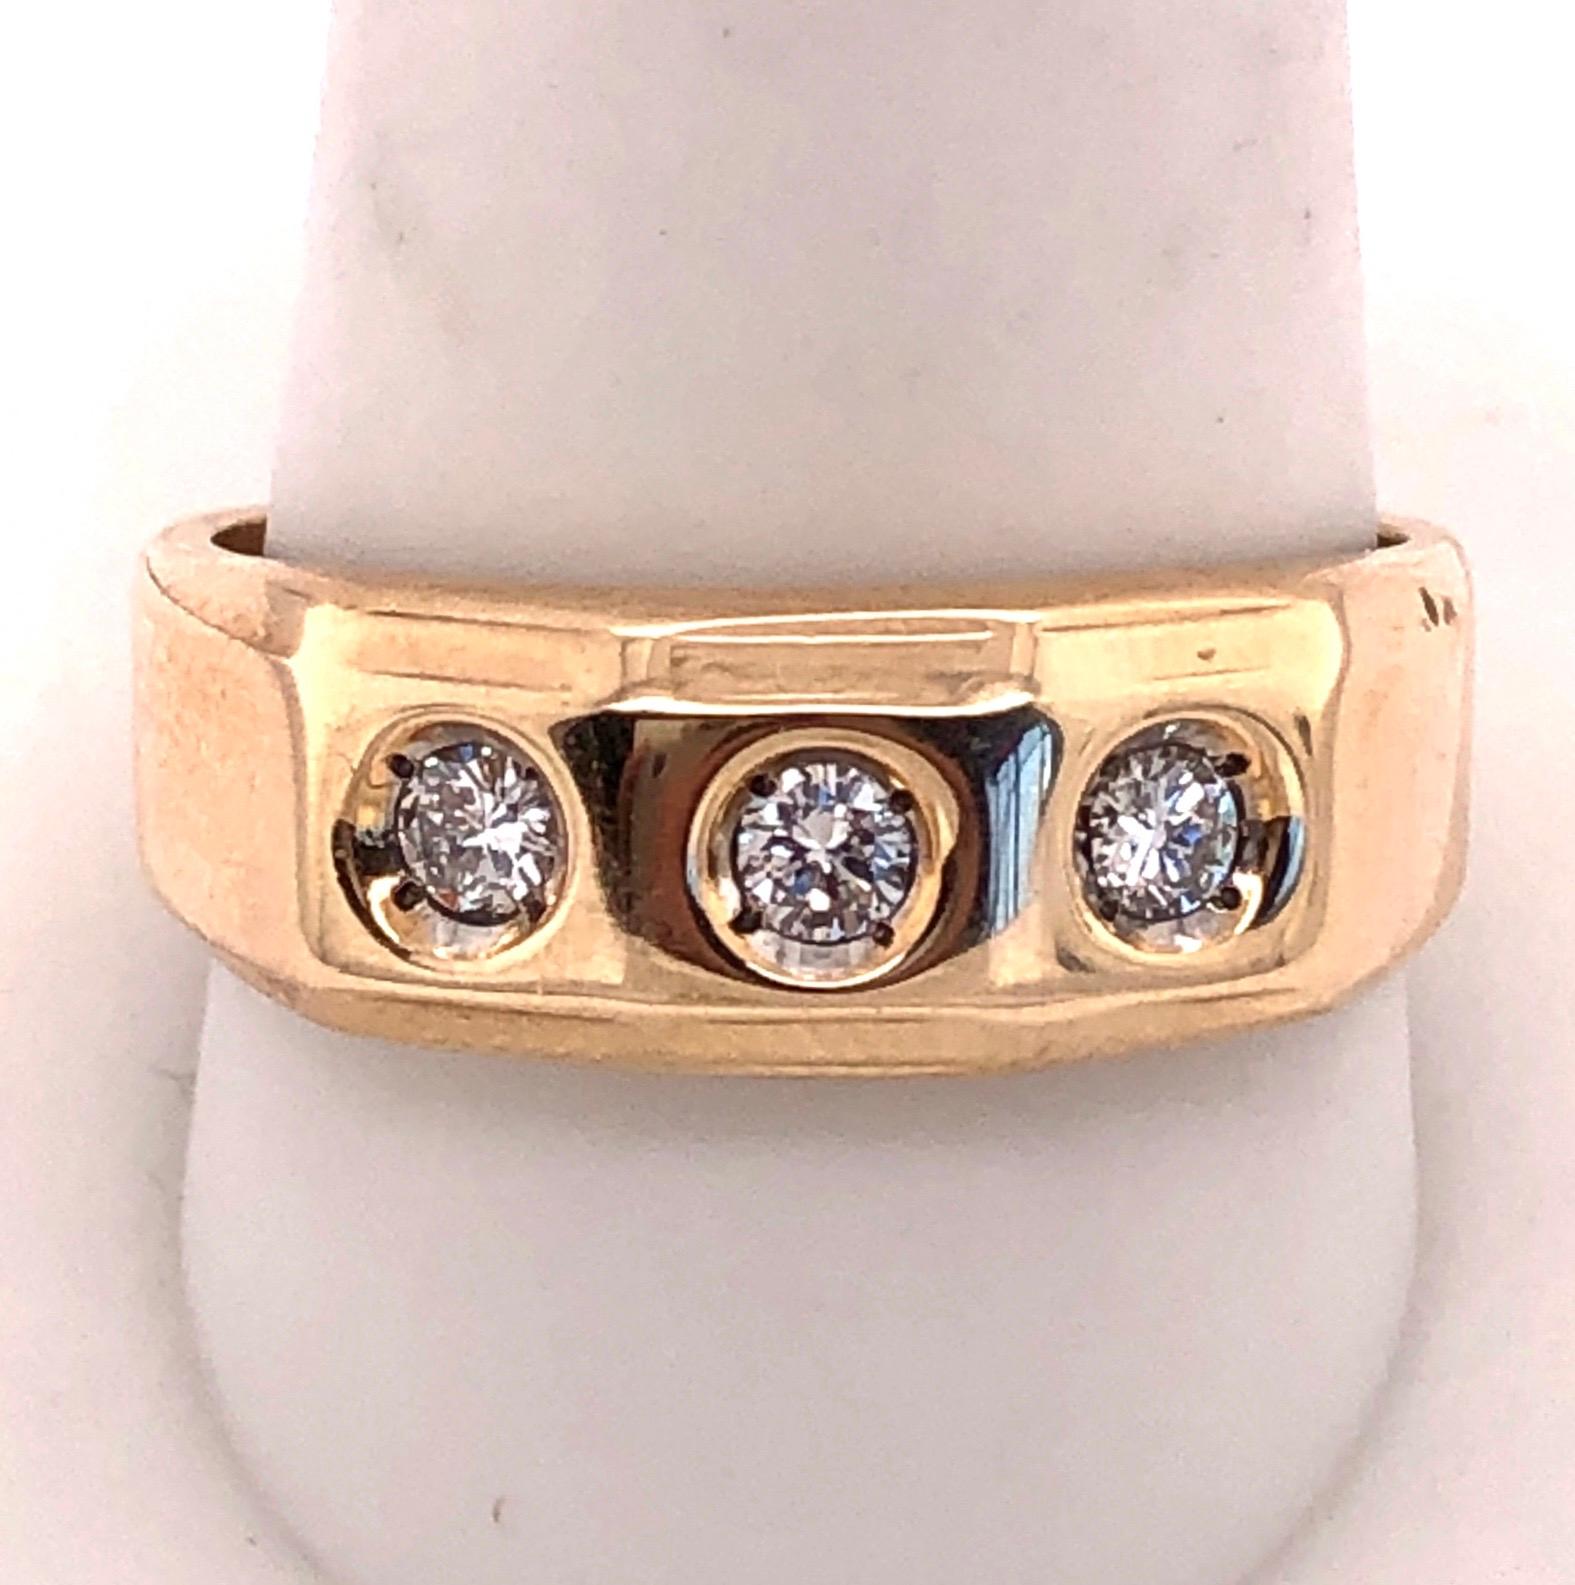 14Kt Three Diamond Yellow Gold Ring One 1/2 Ct Total Diamond Weight
Size 11.5 6.0 grams total weight